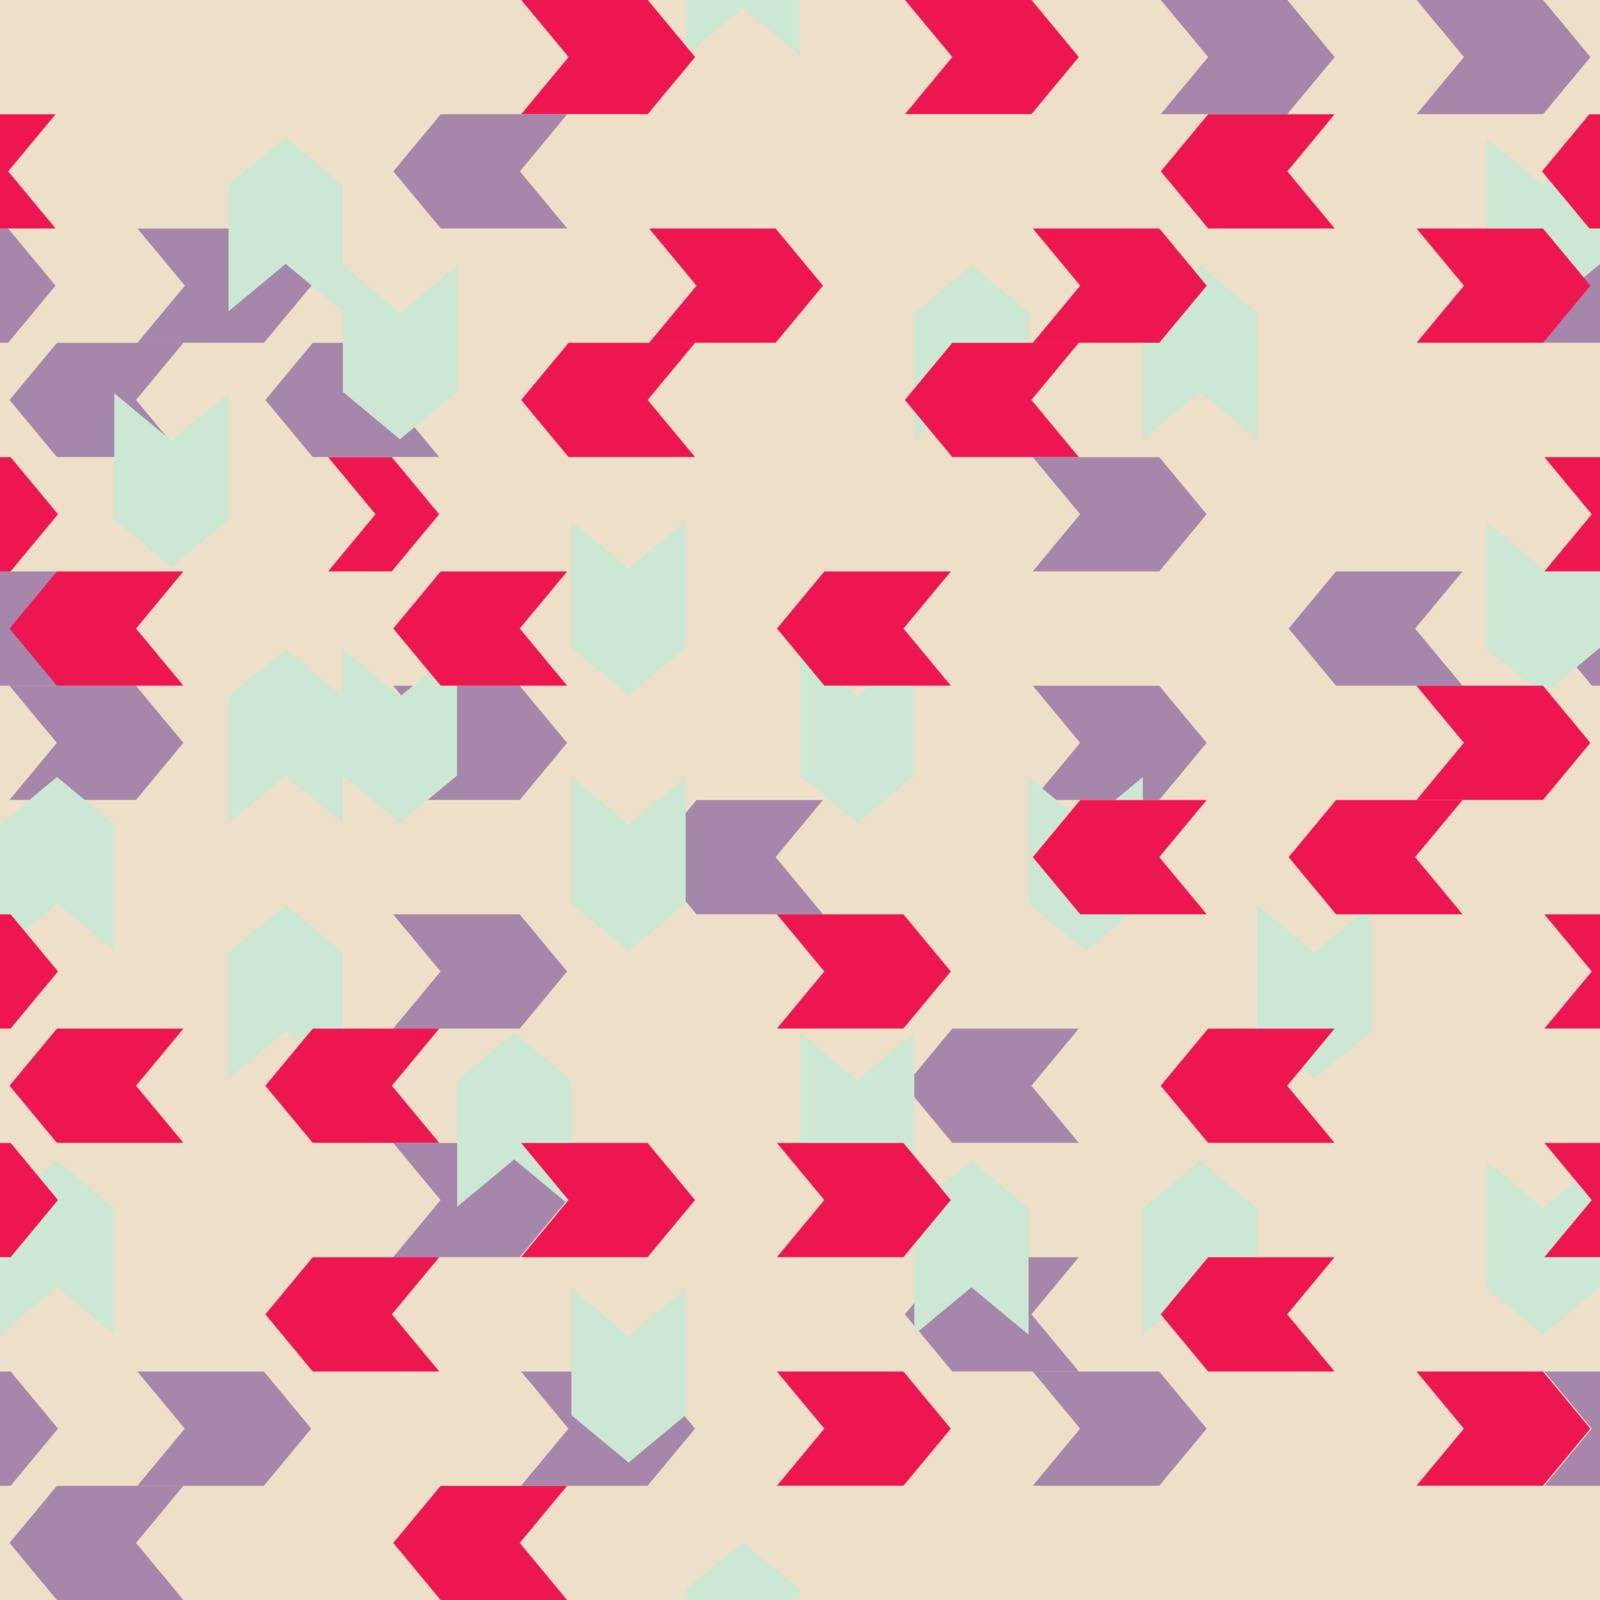 Chevron seamless vector colorful pattern or tile background with zig zag red, mint green and violet stripes.